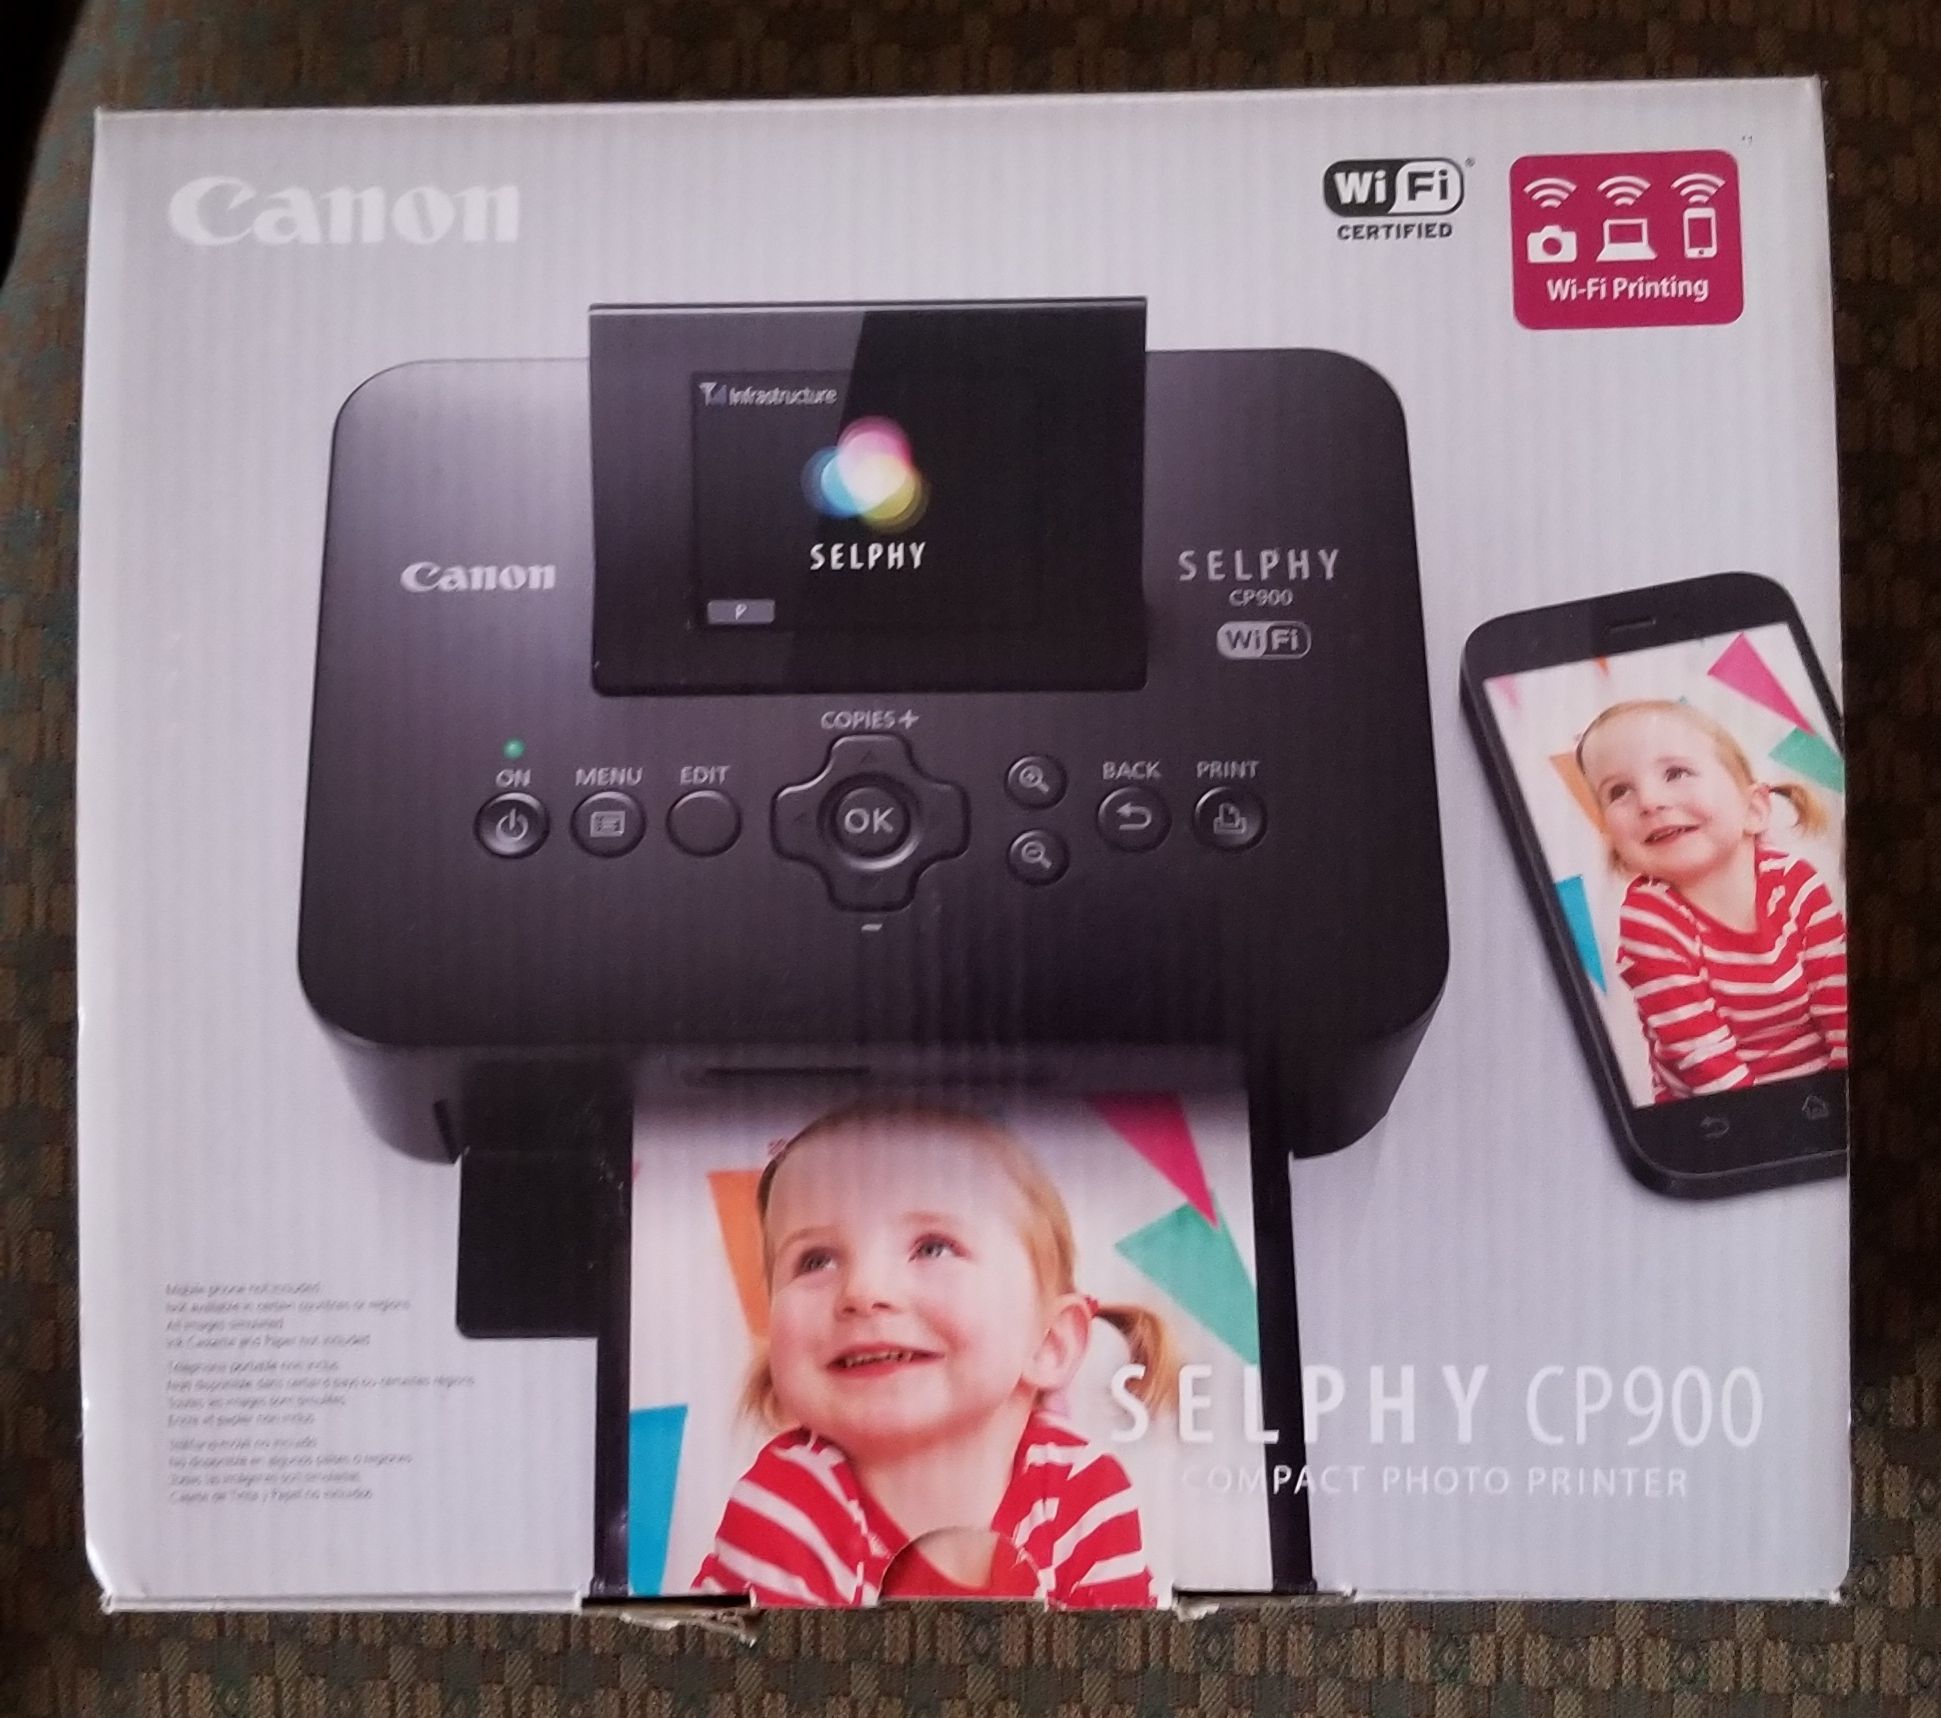 Selphy Compact Photo Printer